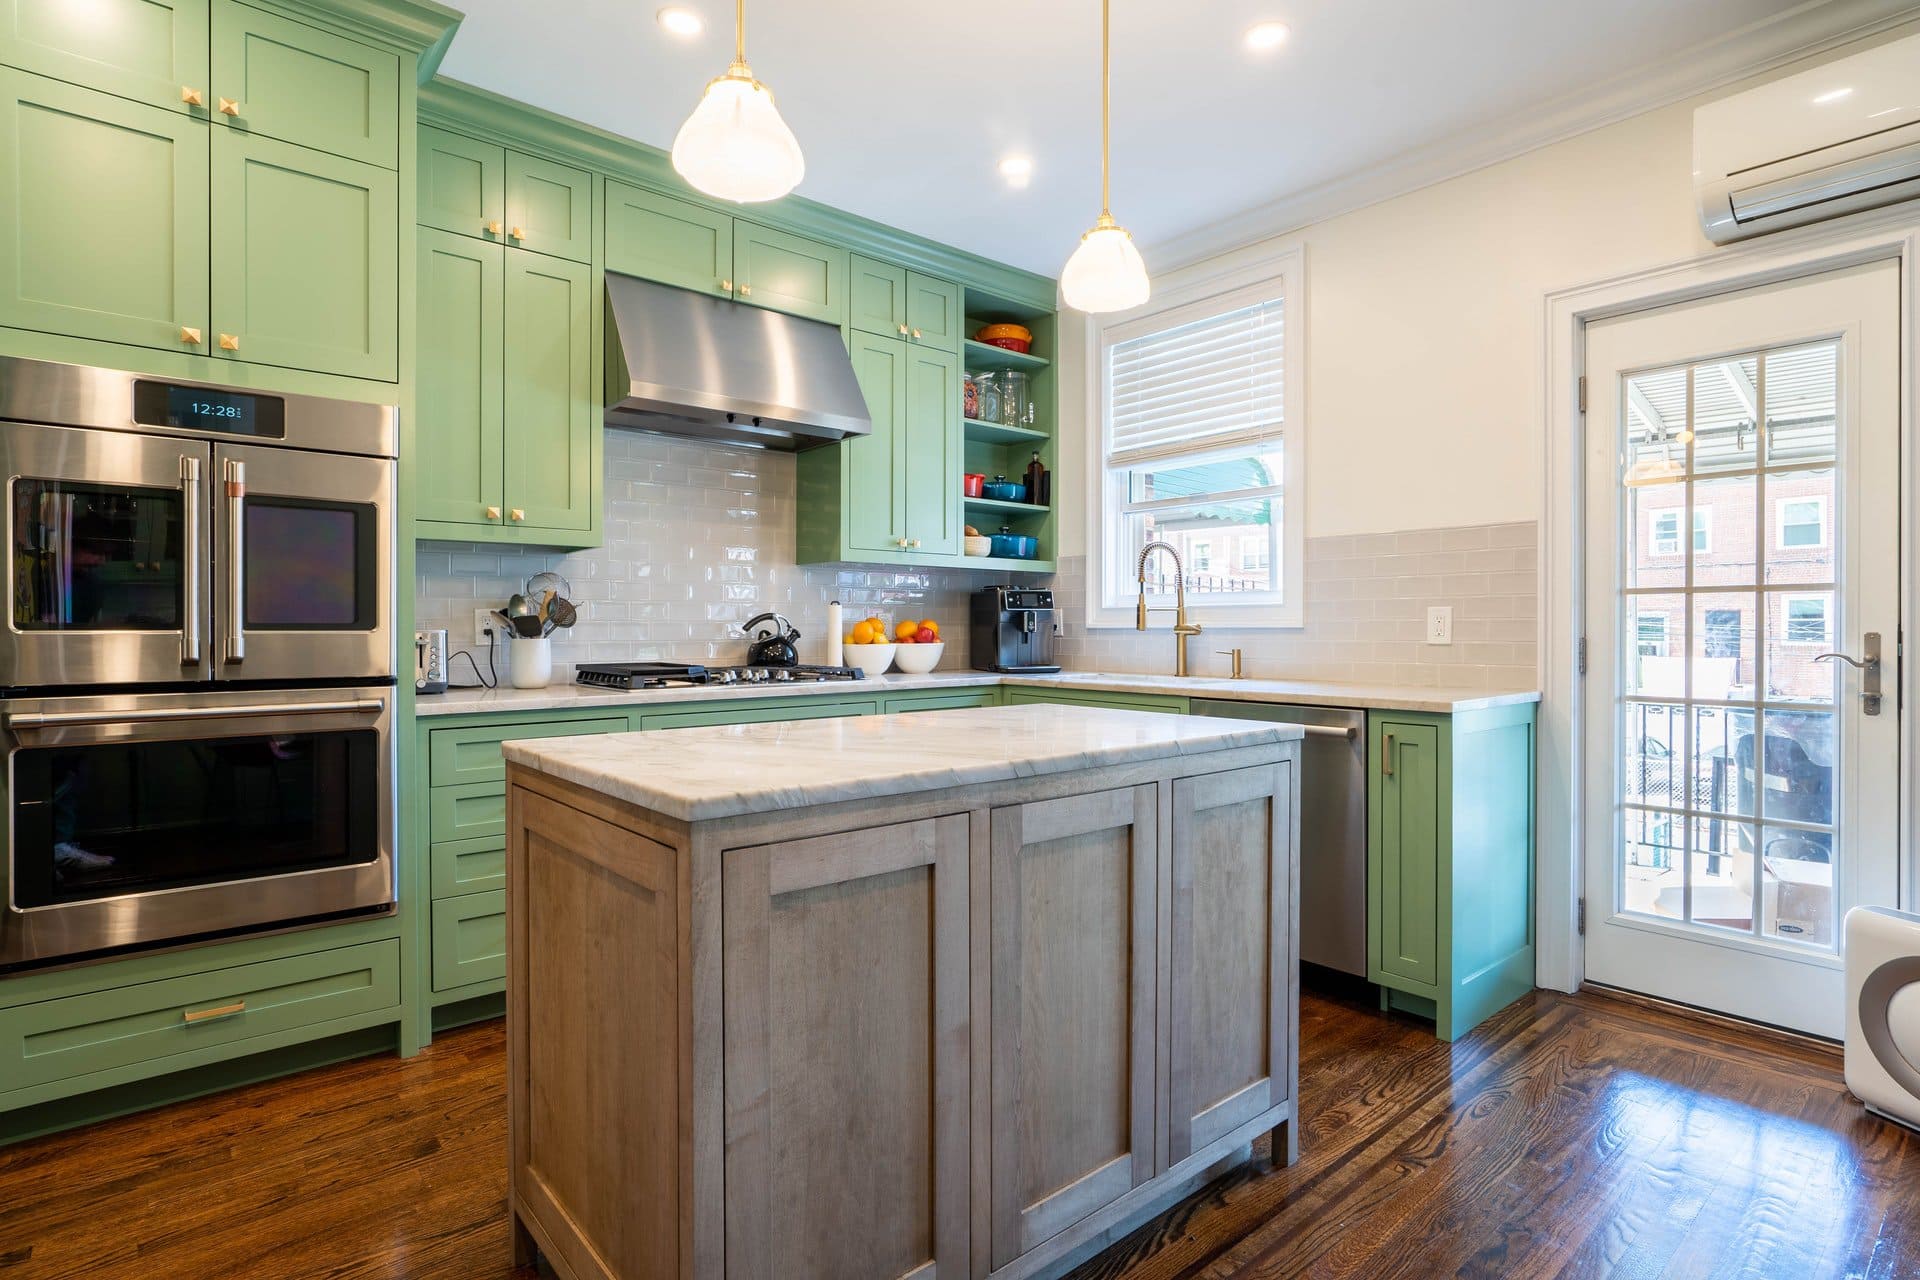 3. Green Cabinets with Red Toned Wood Floors